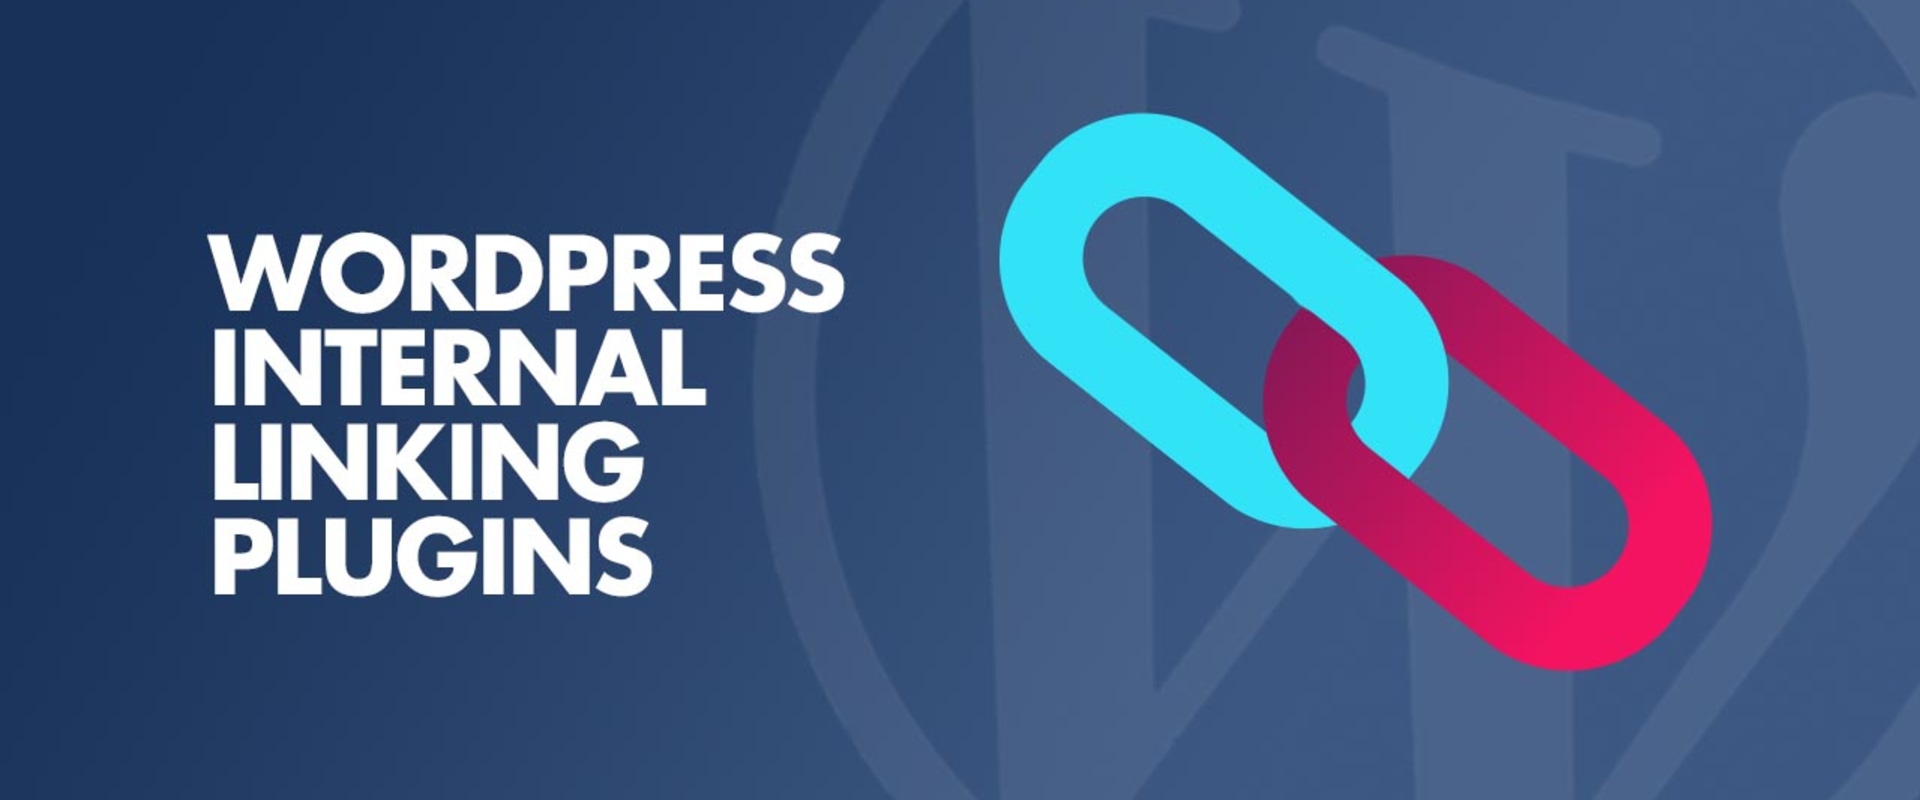 The Importance of Internal Linking for Wordpress SEO